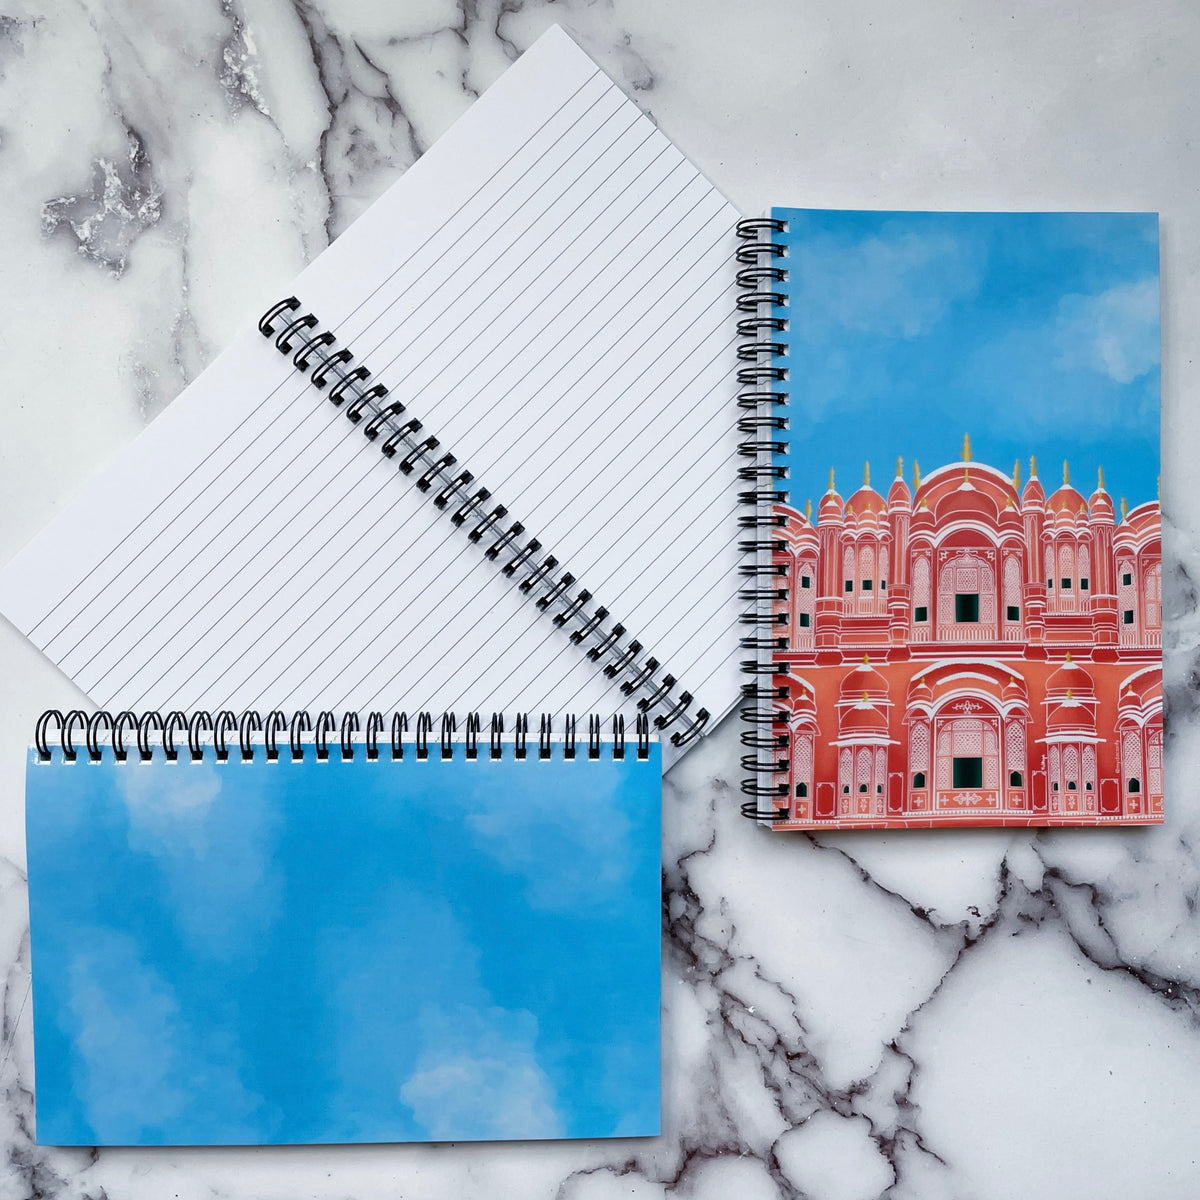 The Pink City (Jaipur) Notebook